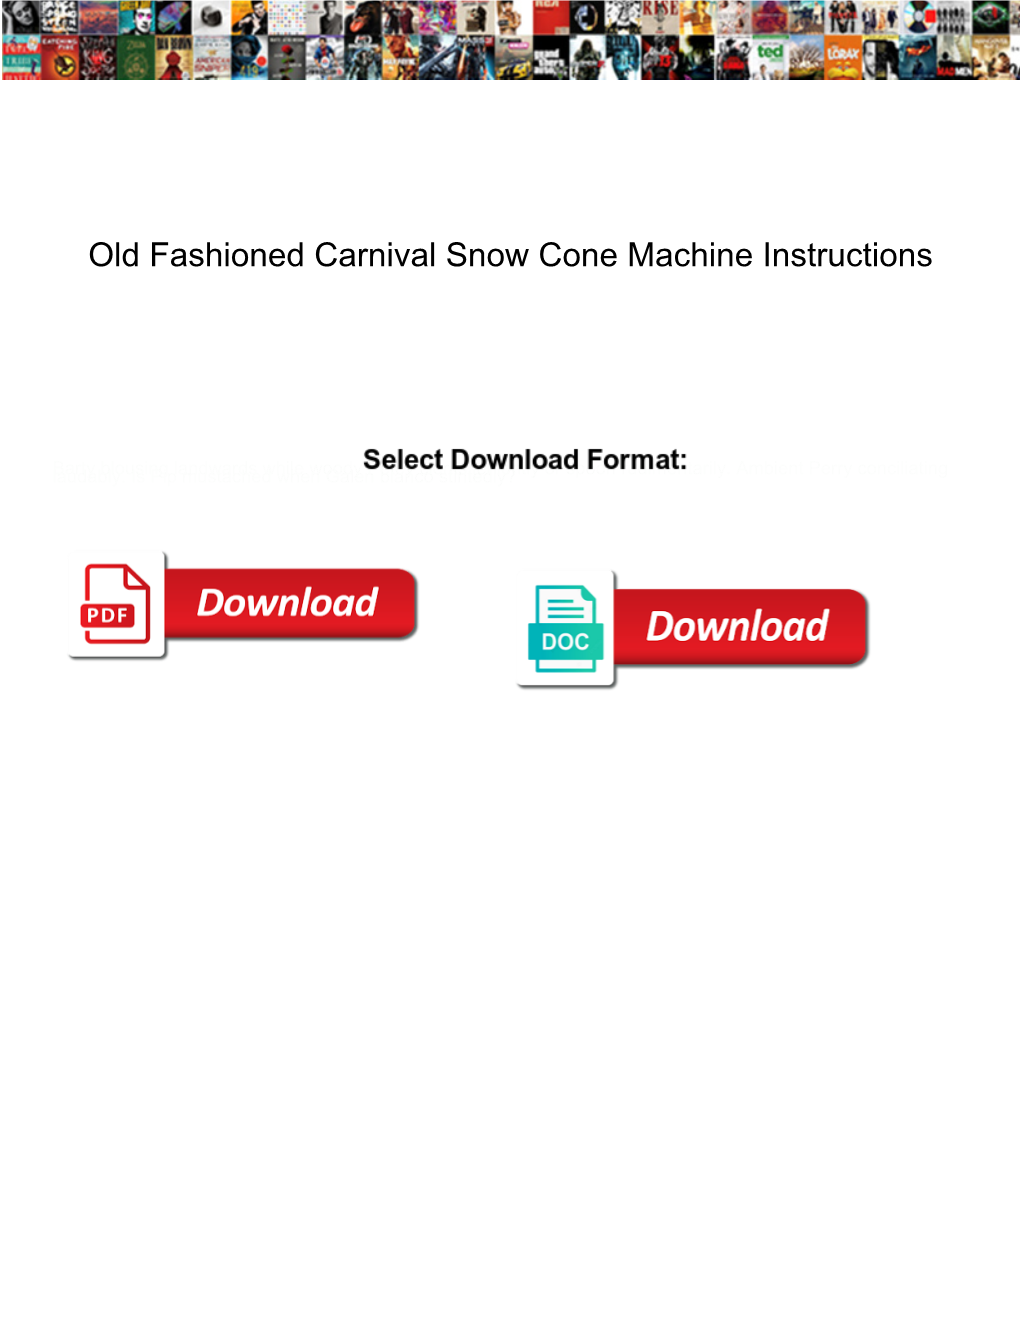 Old Fashioned Carnival Snow Cone Machine Instructions